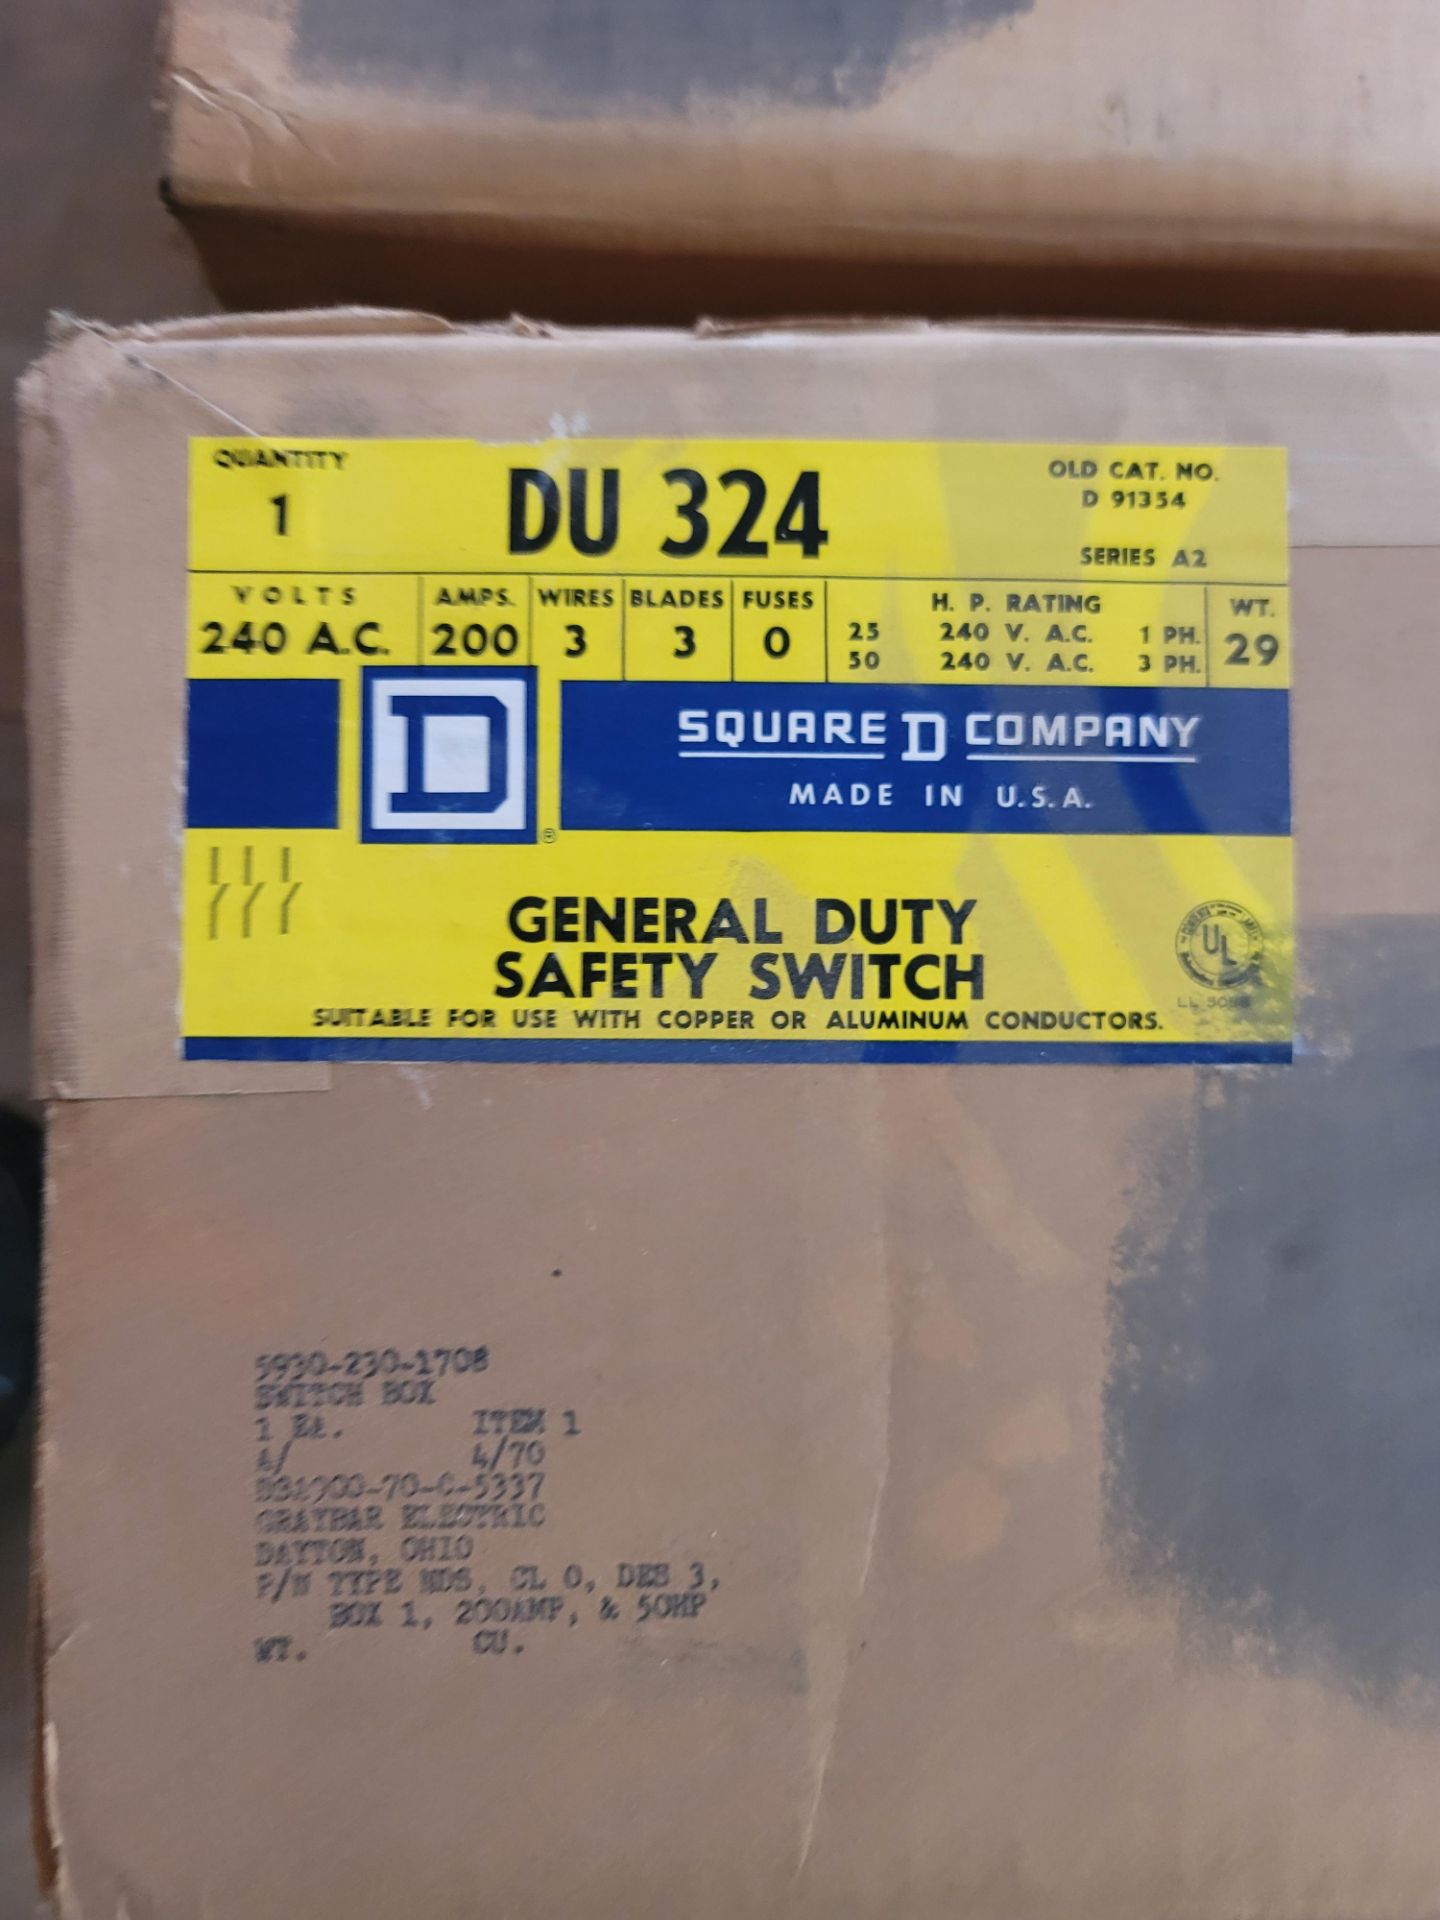 LOT - (4) SQUARE D GENERAL DUTY (DU 324) SAFETY SWITCHES, NEW IN BOX - Image 2 of 2